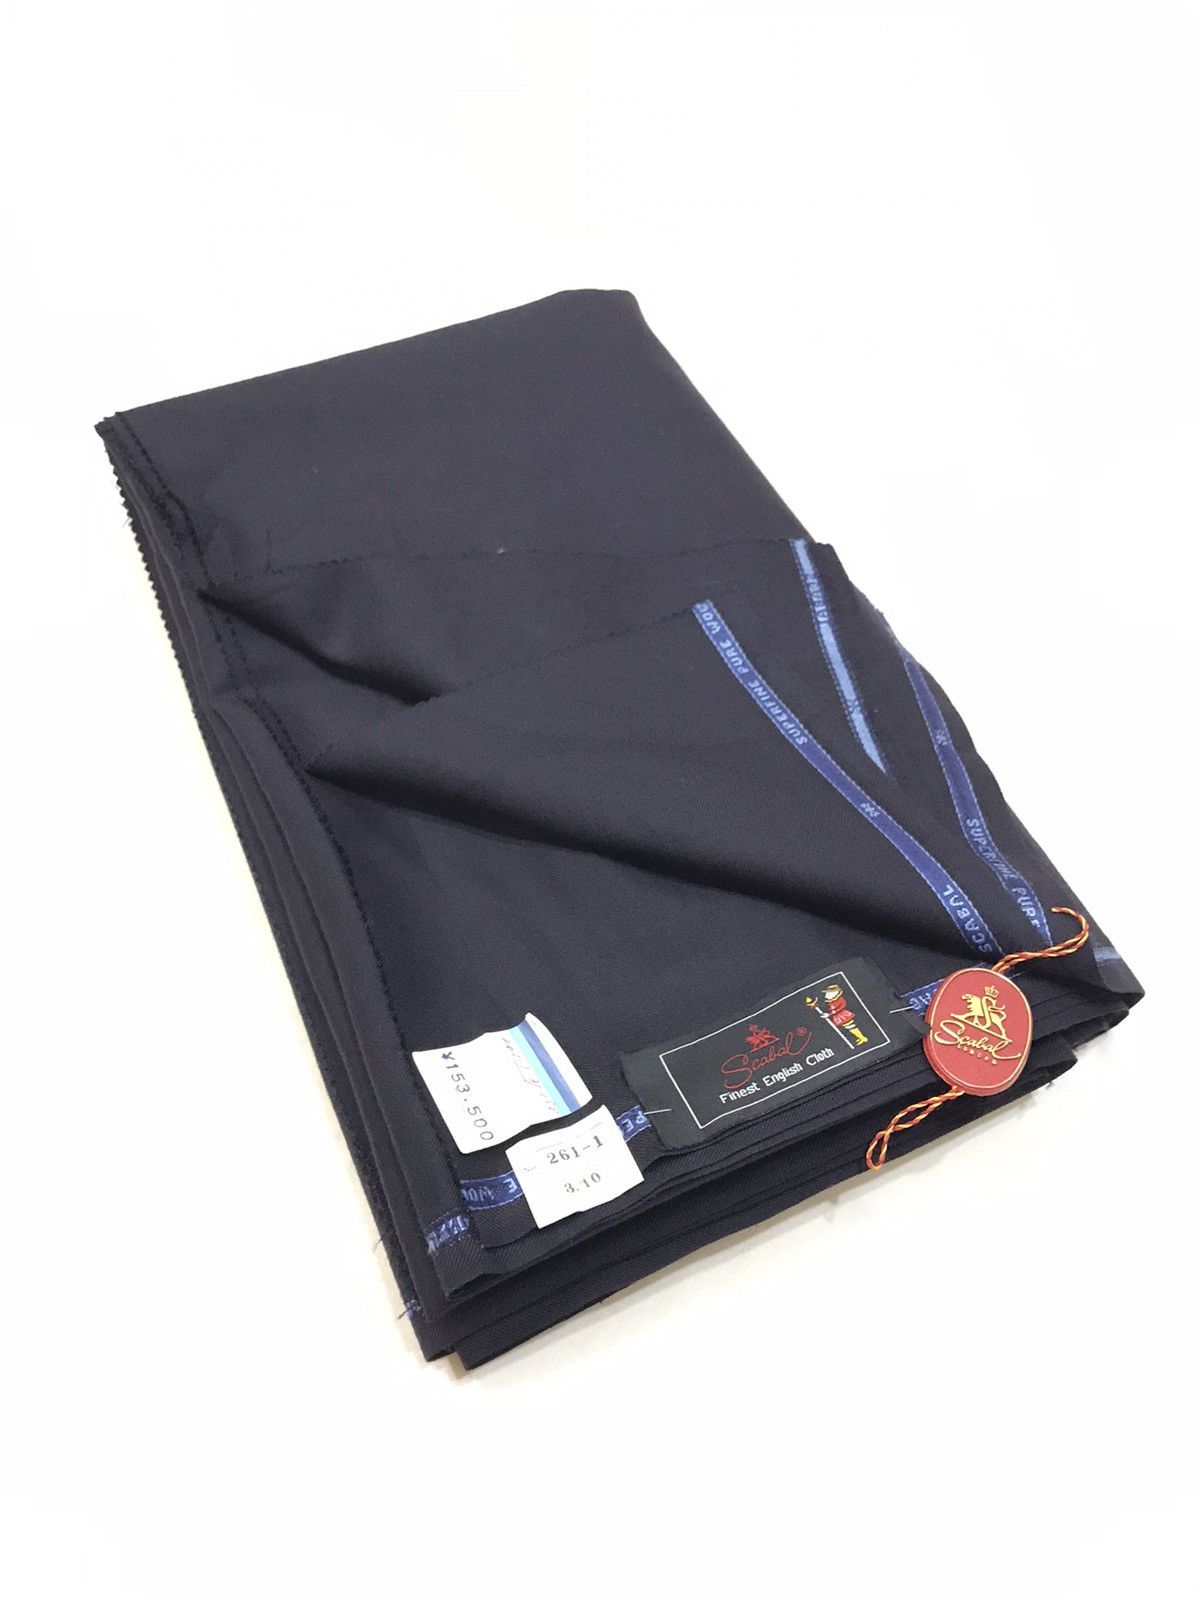 Cashmere & Wool NEW SCABAL SUPERFINE PURE WOOL FABRIC 3.2m x 1.6m | Grailed